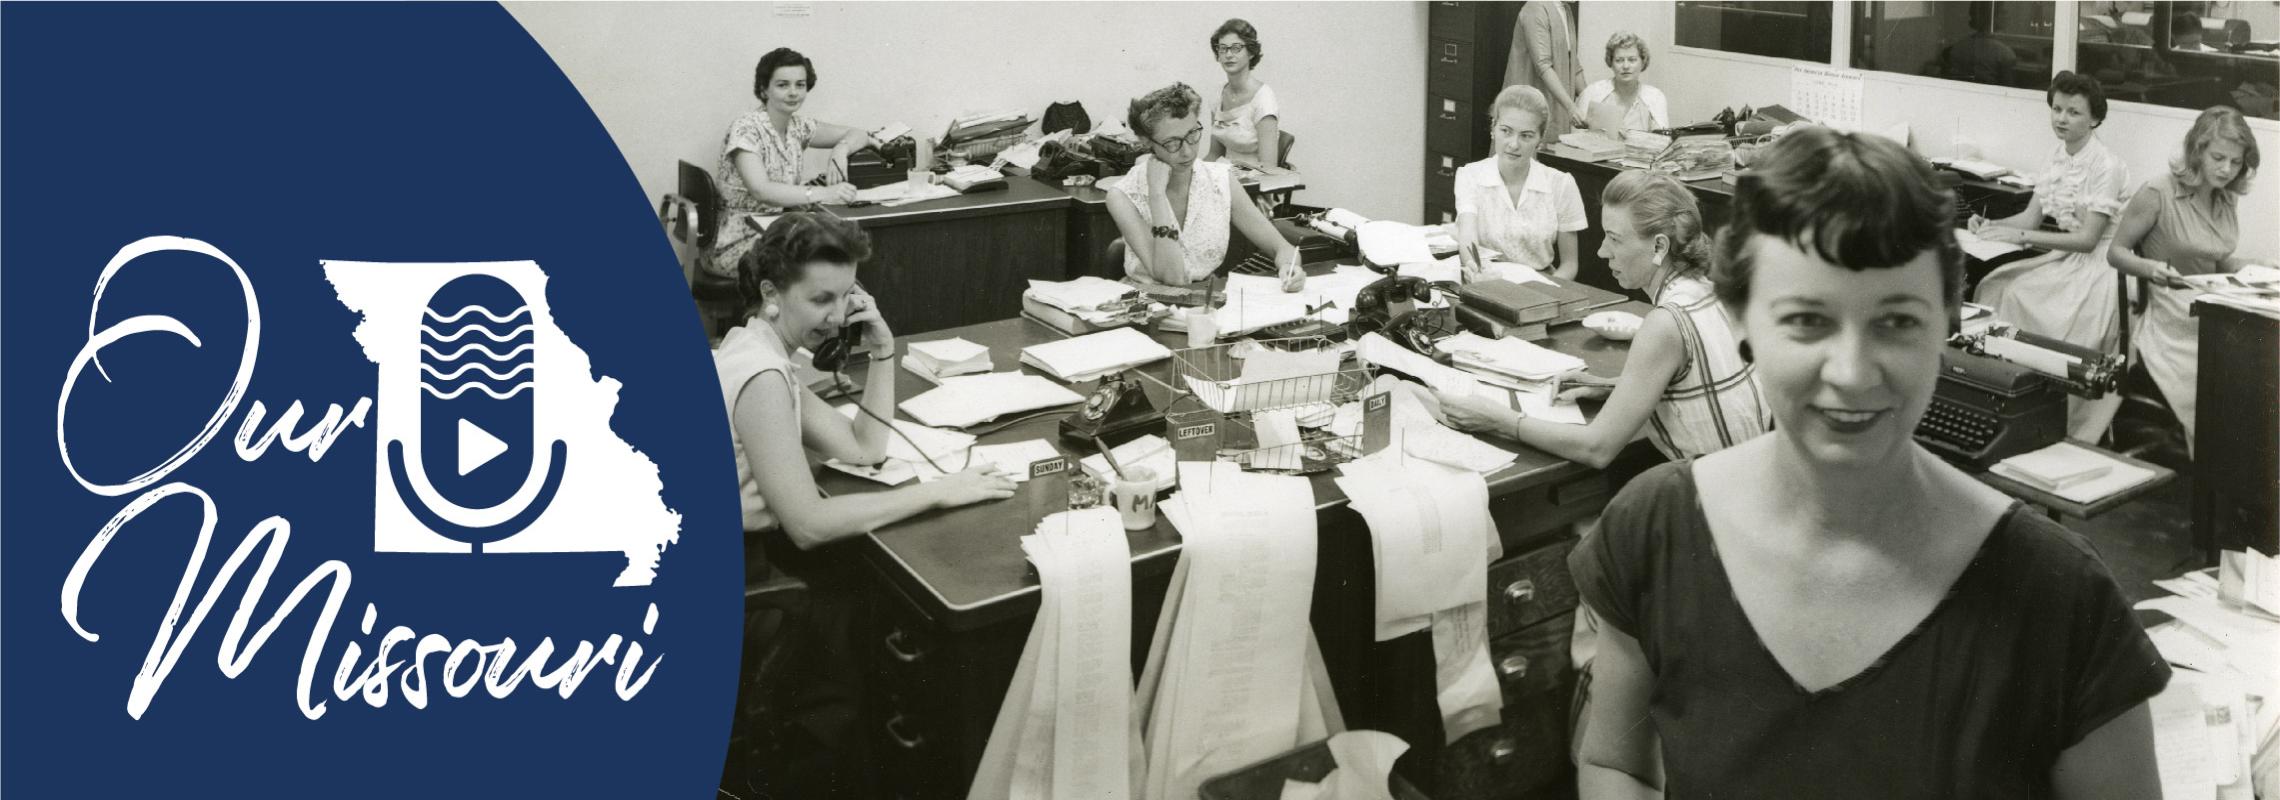 1950-60s era photo with a woman standing in the foreground as other women work collaboratively behind her presumably as journalists